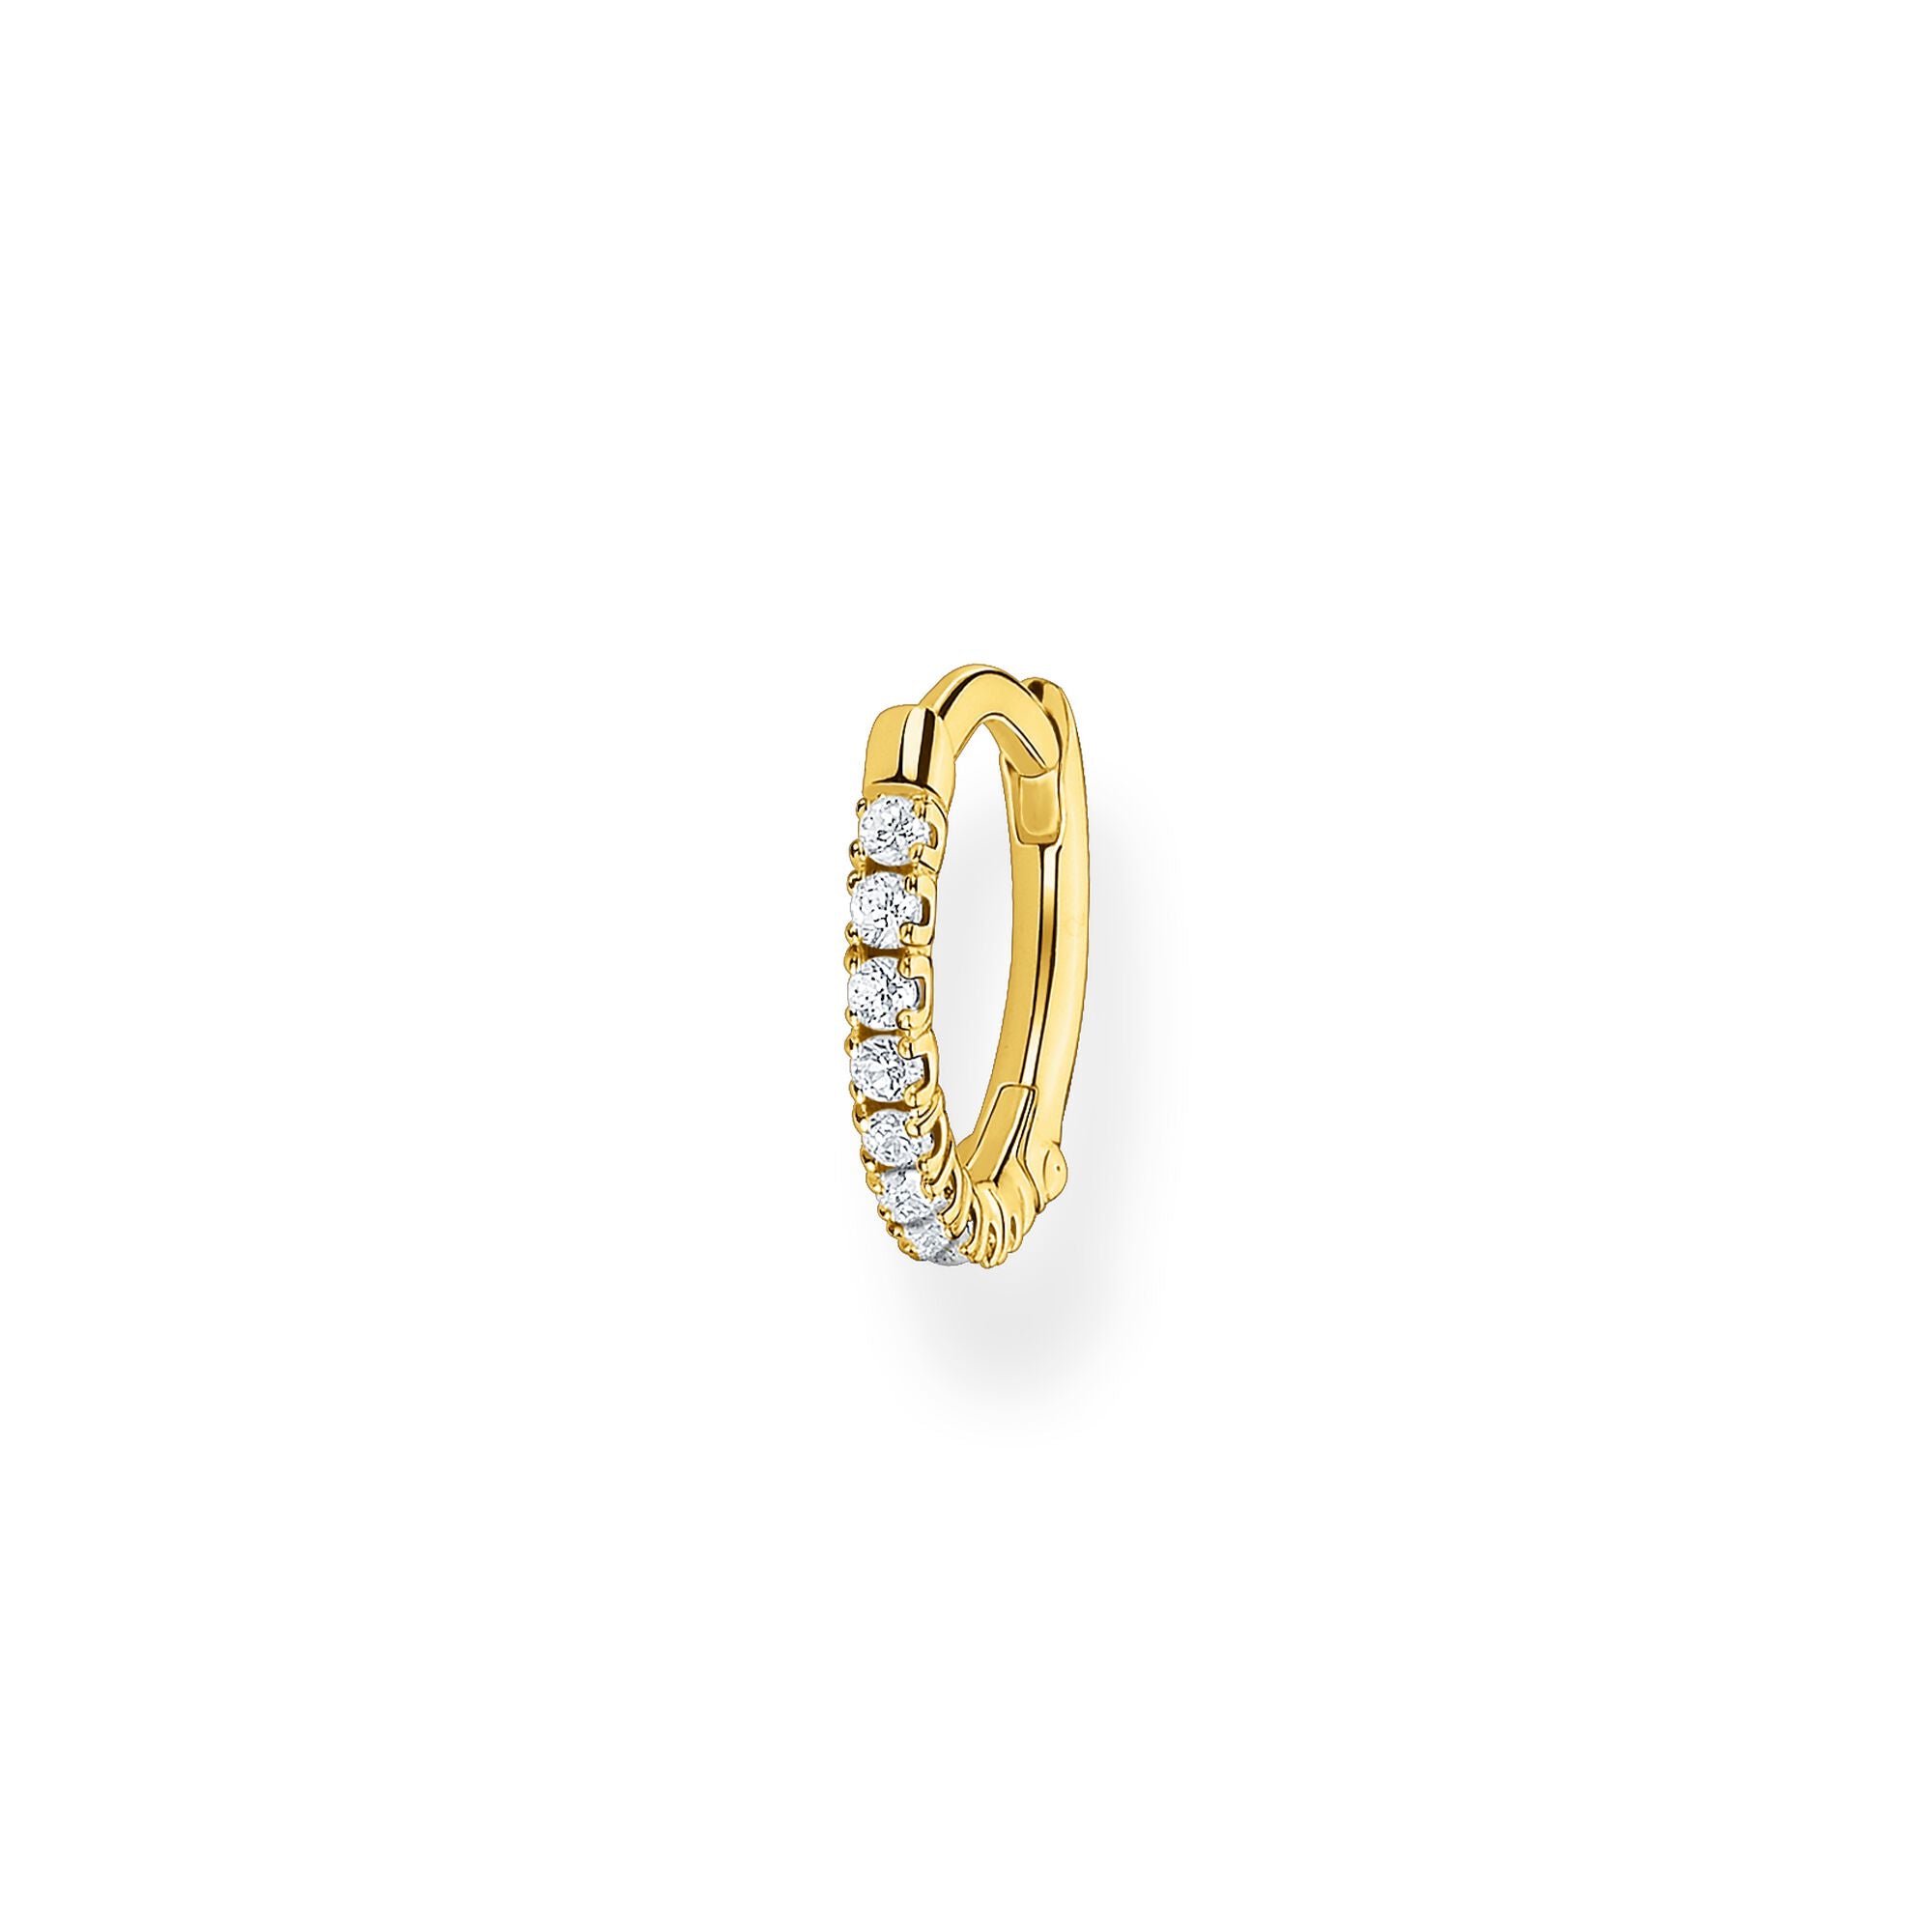 Thomas Sabo, Sterling Silver, Yellow Gold Plated, Cubic Zirconia, Multi Stone, Hoop, 12mm, Single Earring, Ottawa